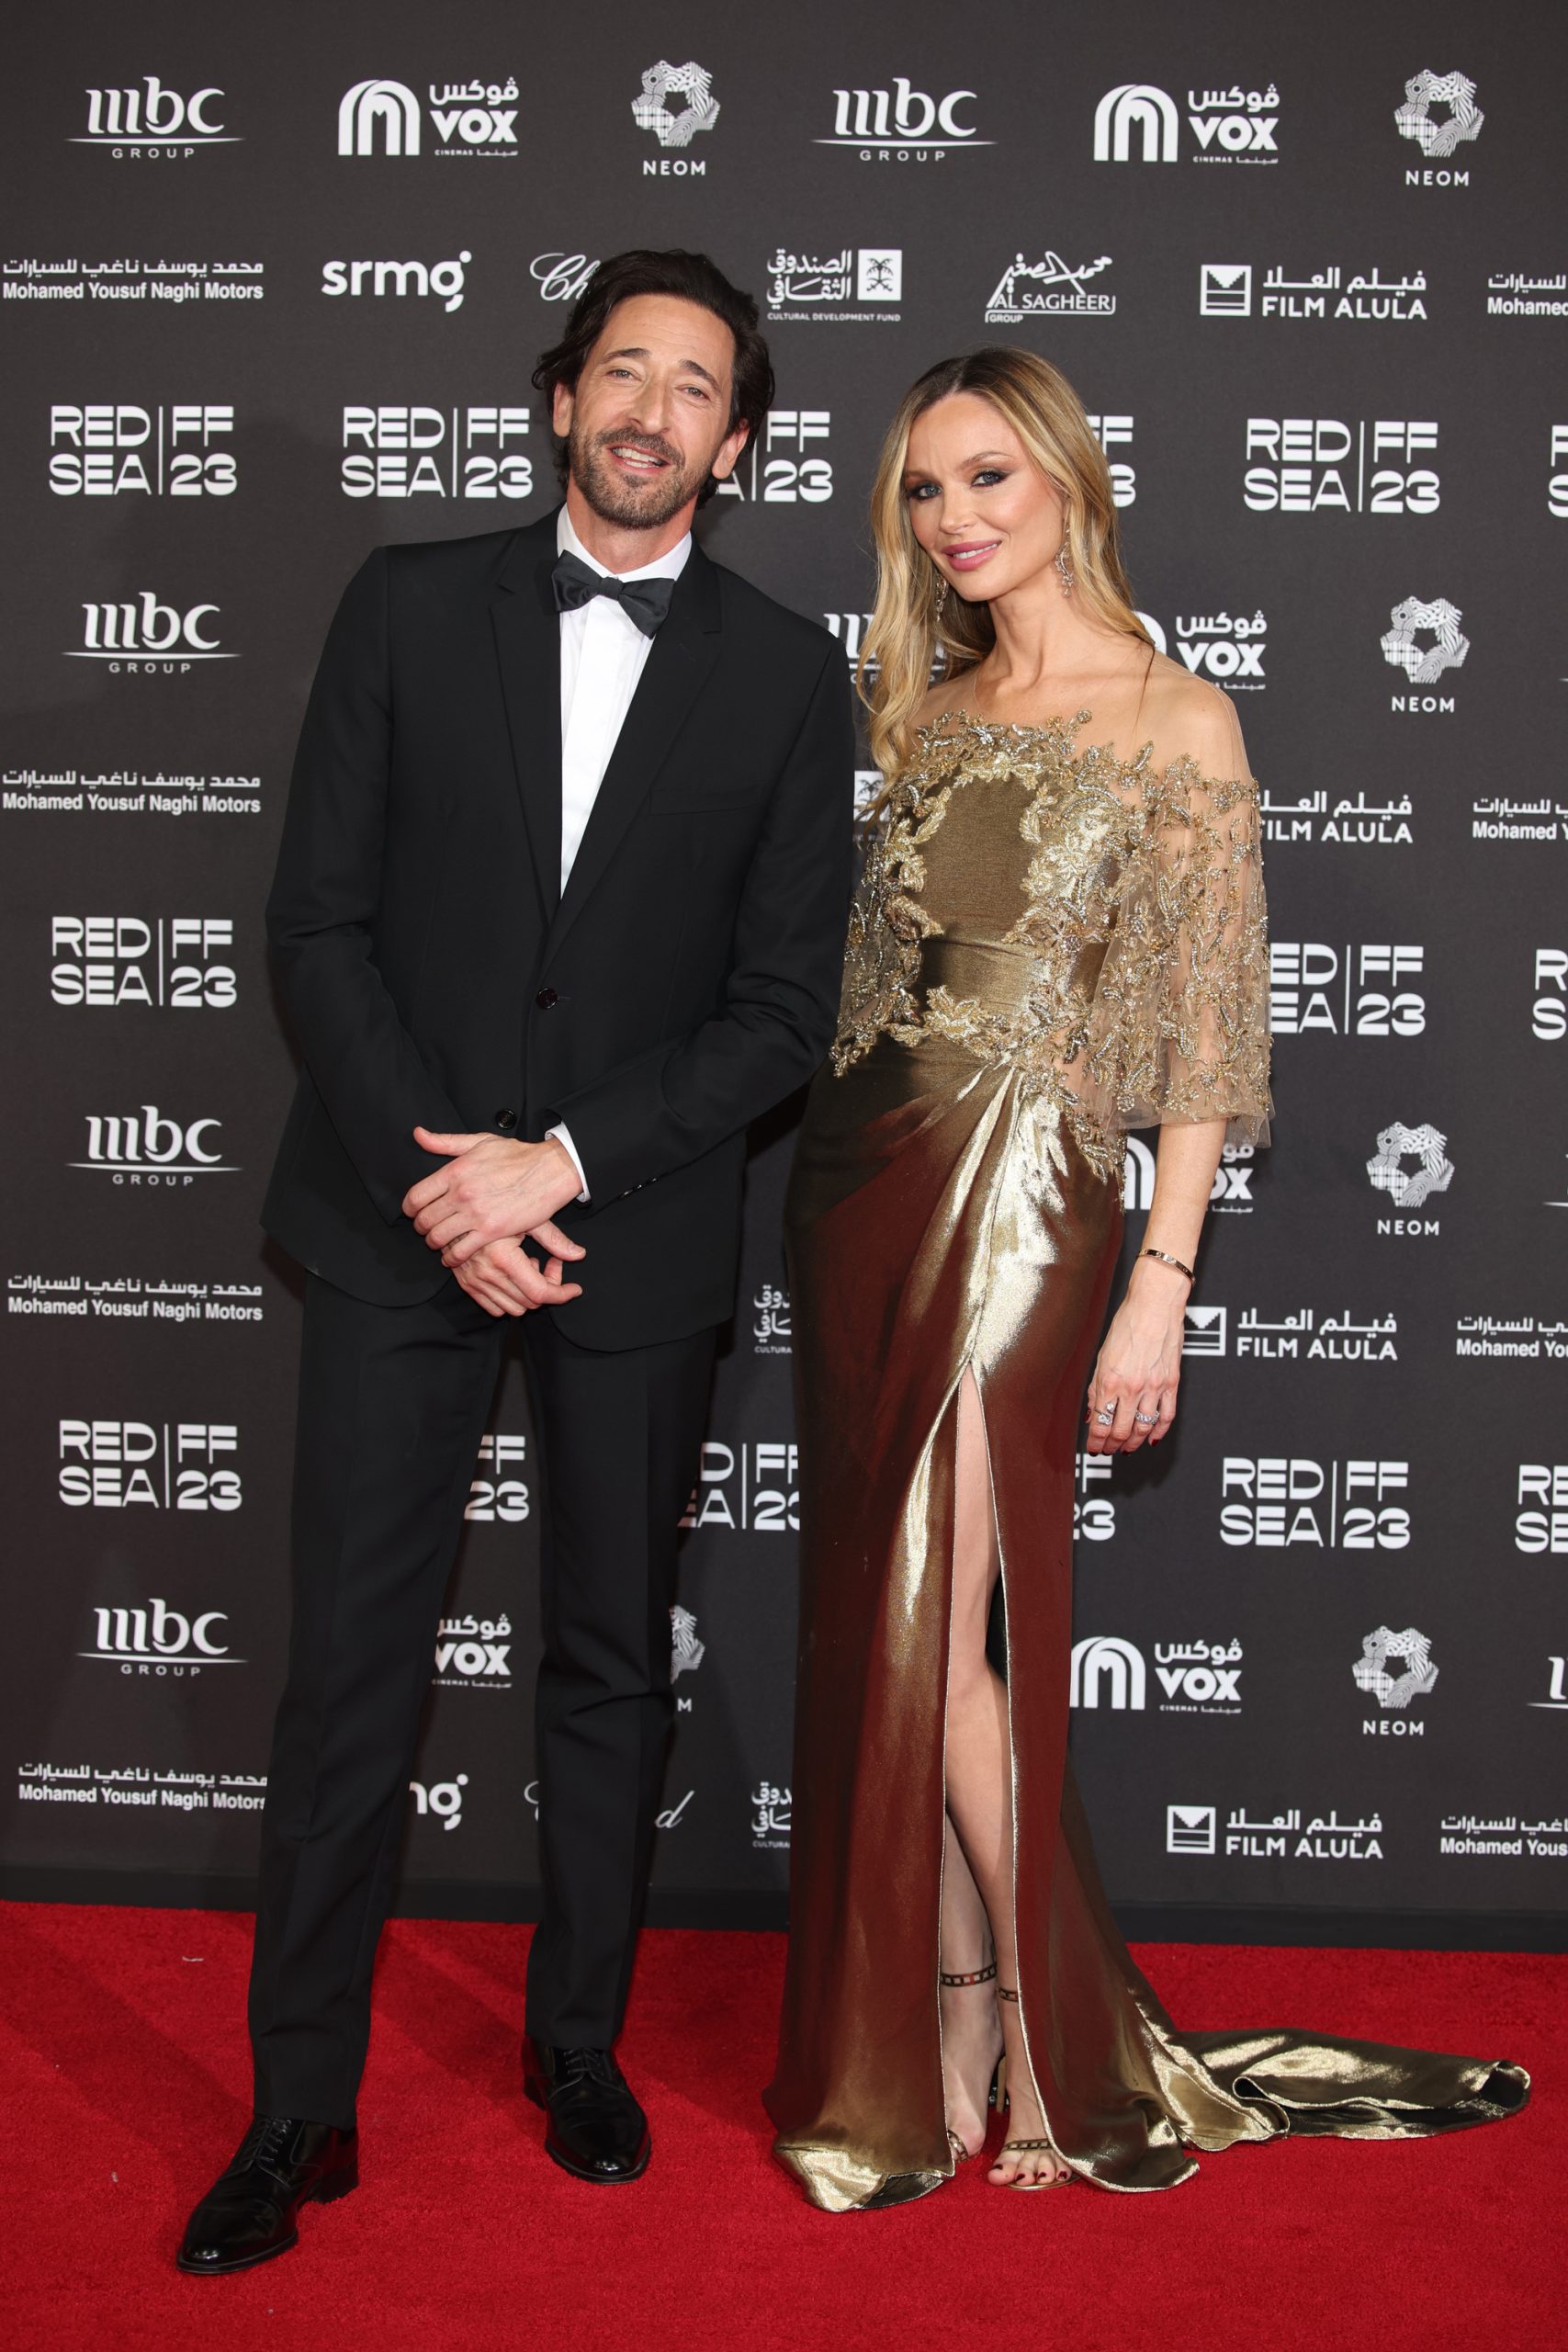 JEDDAH, SAUDI ARABIA - DECEMBER 07: Adrien Brody and Georgina Chapman attend the red carpet on the closing night of the Red Sea International Film Festival 2023 on December 07, 2023 in Jeddah, Saudi Arabia. (Photo by Daniele Venturelli/Getty Images for The Red Sea International Film Festival)